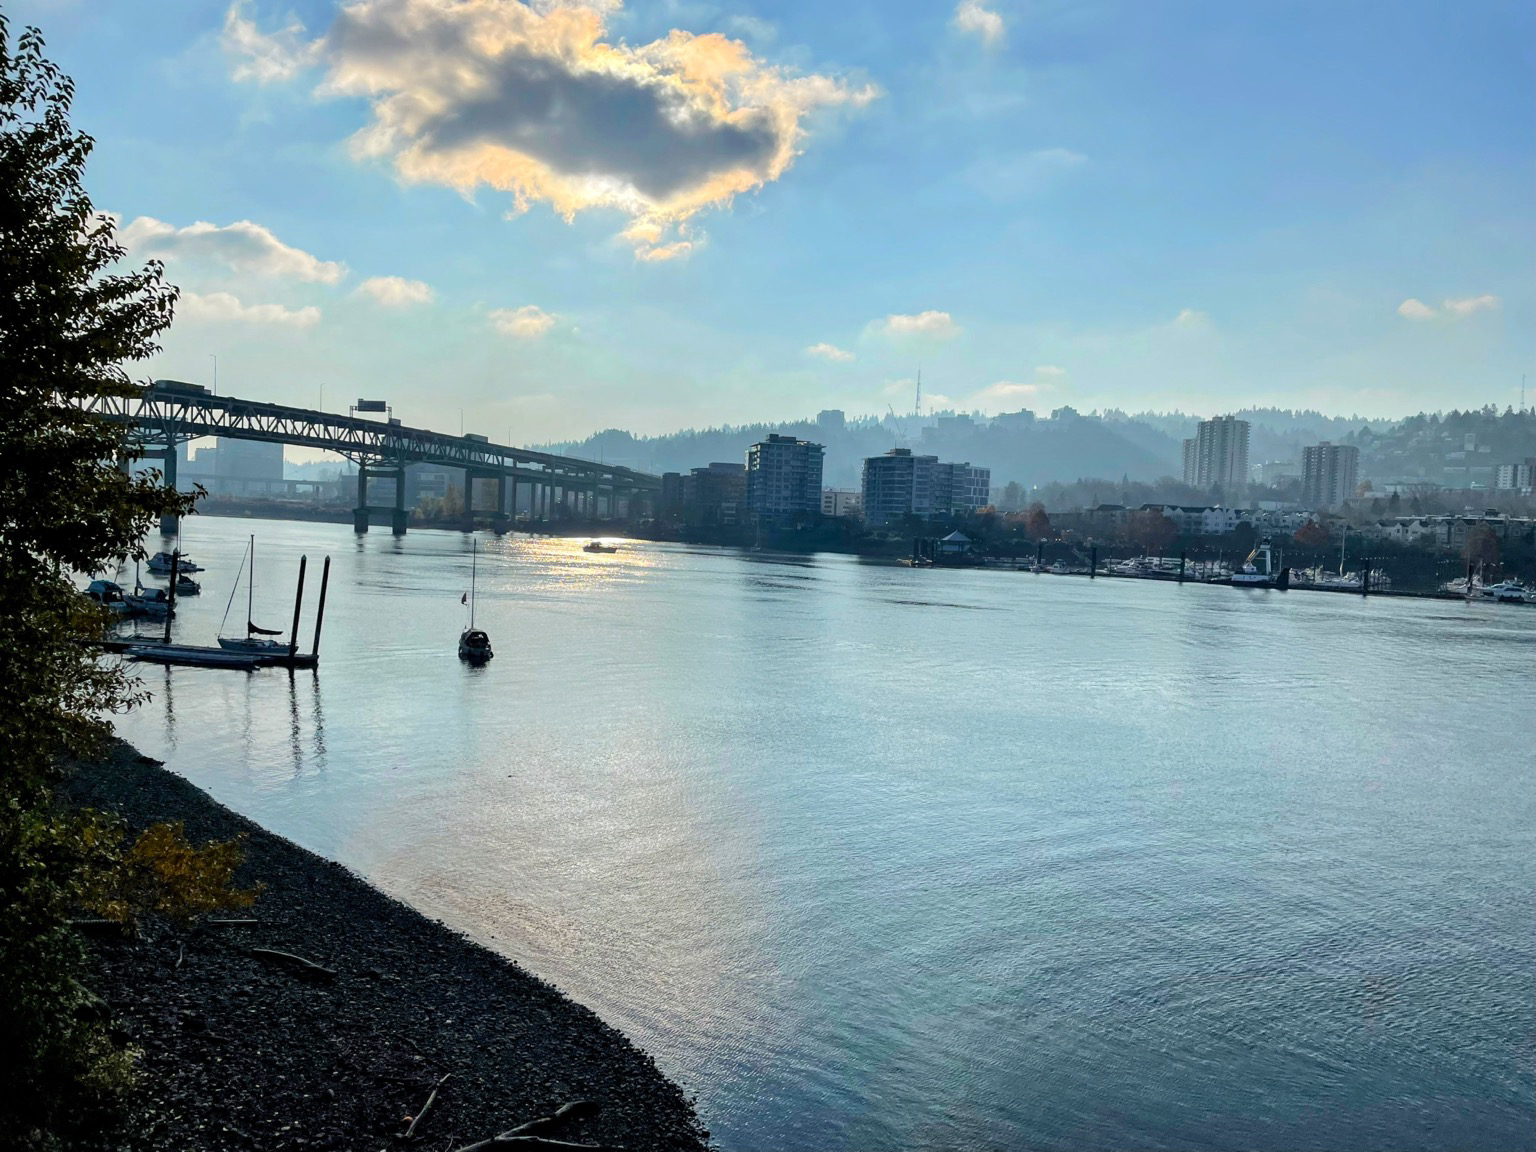 Looking across the Willamette River towards downtown Portland, Oregon, with the sun reflecting gently on the river while hidden behind a cloud.